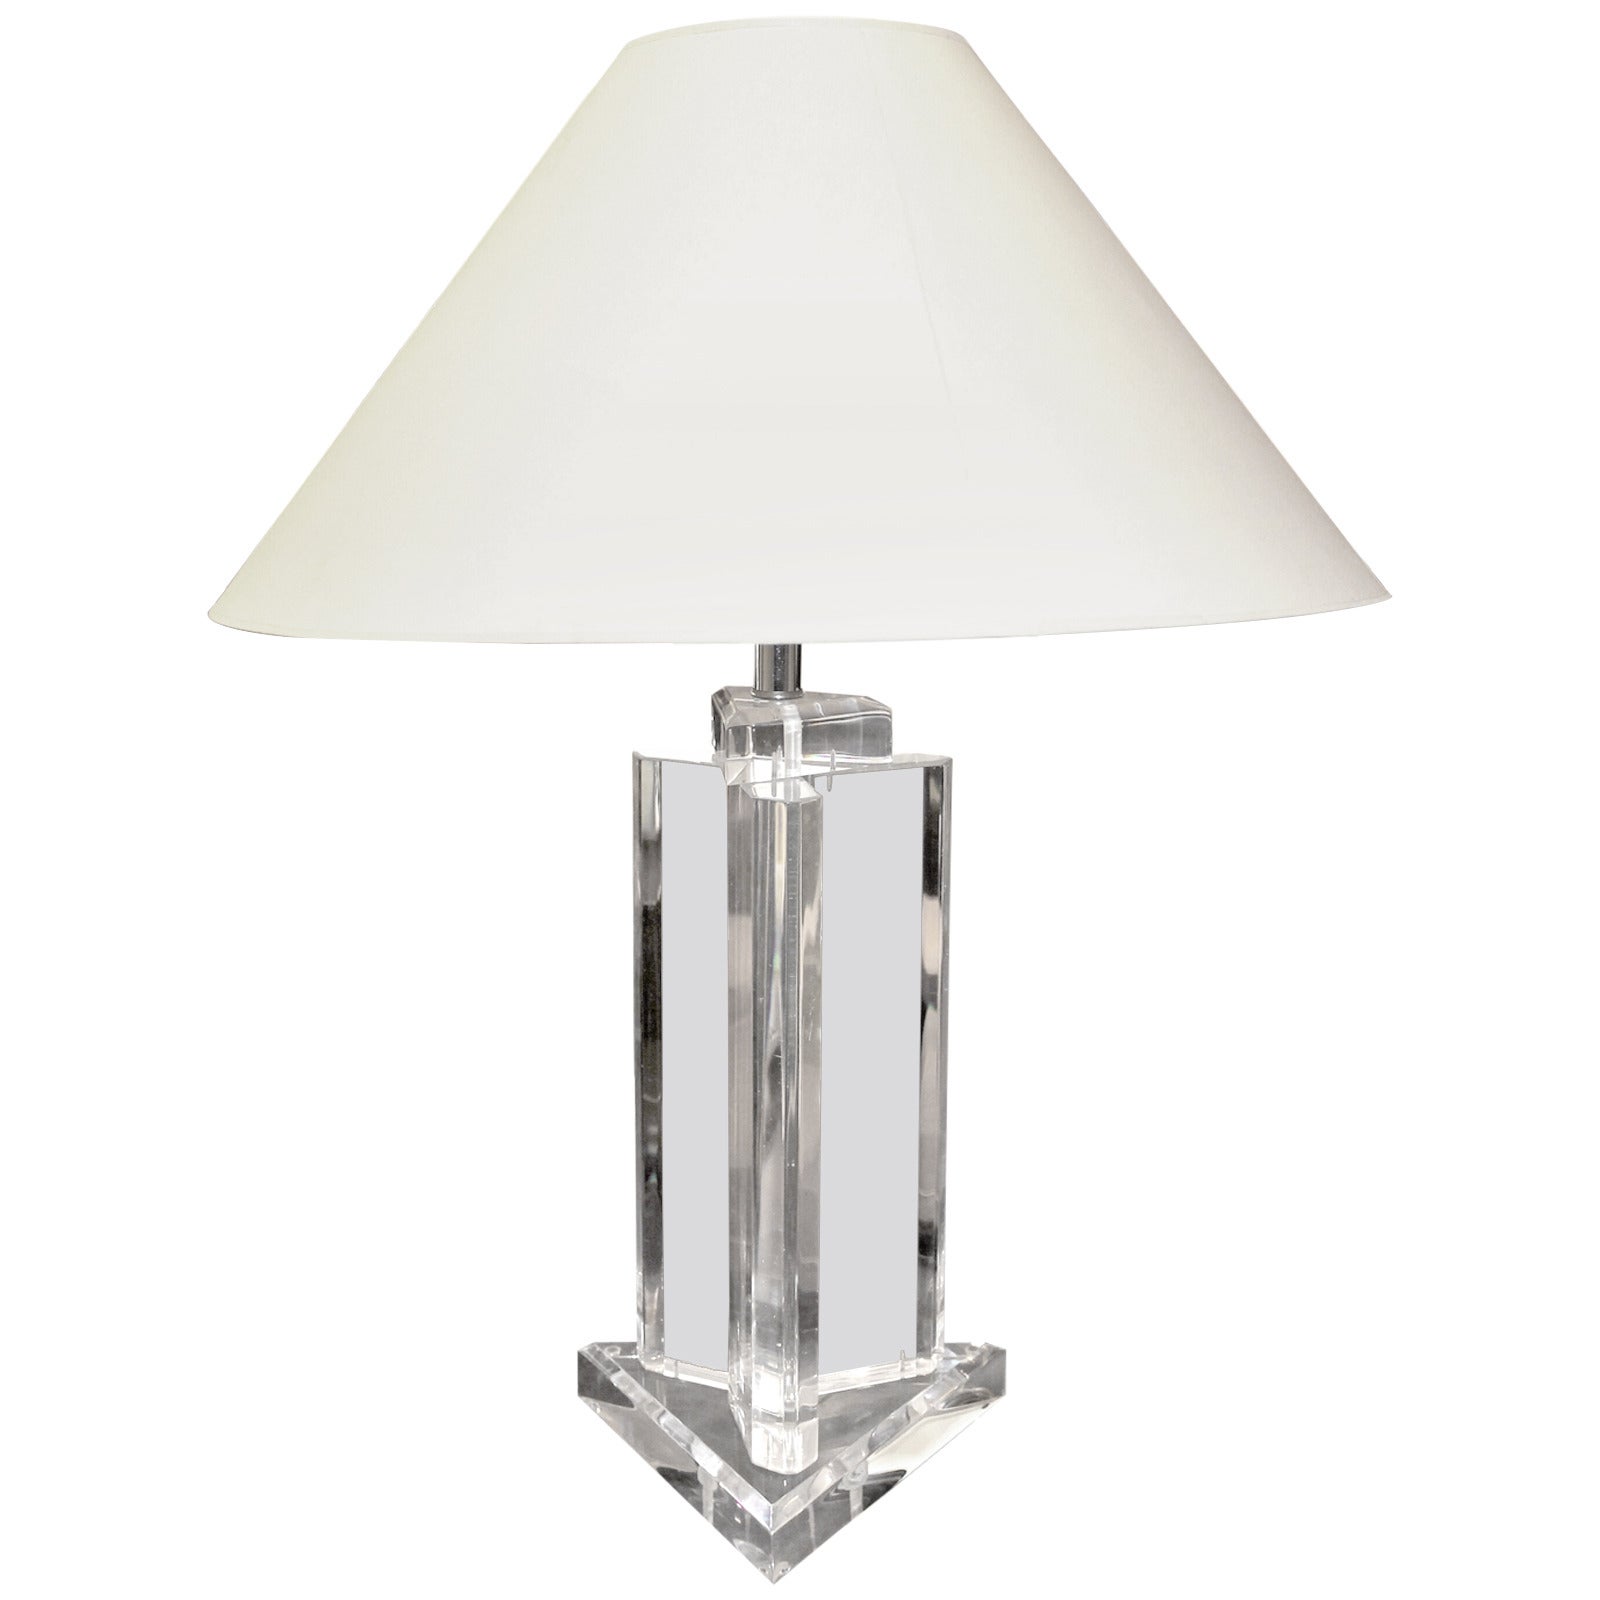 Late 20th Century Lucite Table Lamp For Sale